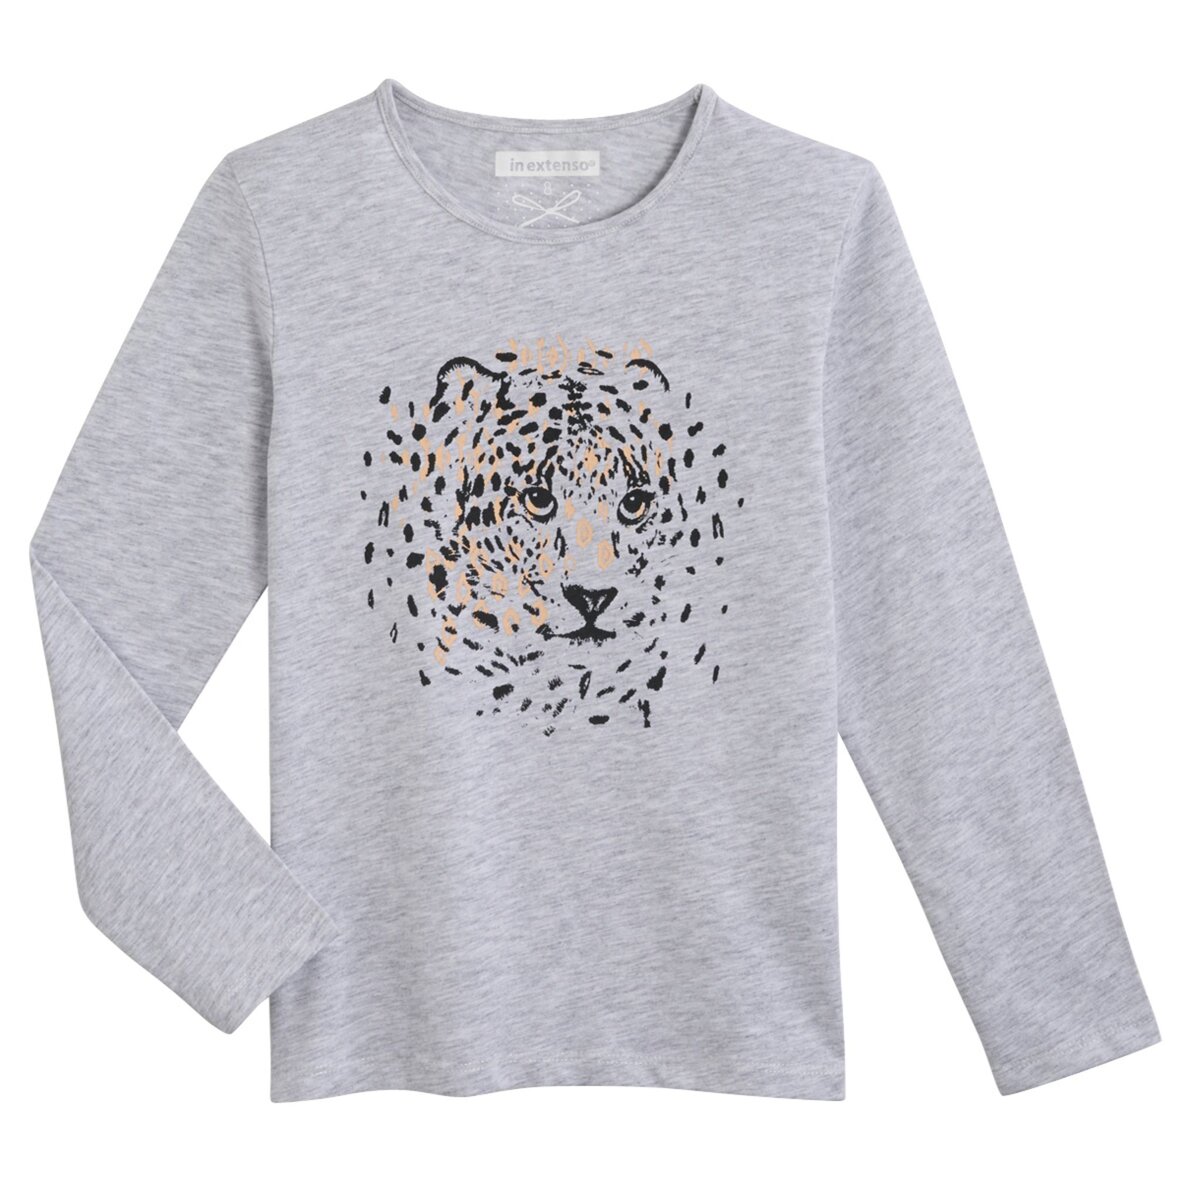 IN EXTENSO Tee-shirt manches longues imprimé tigre fille